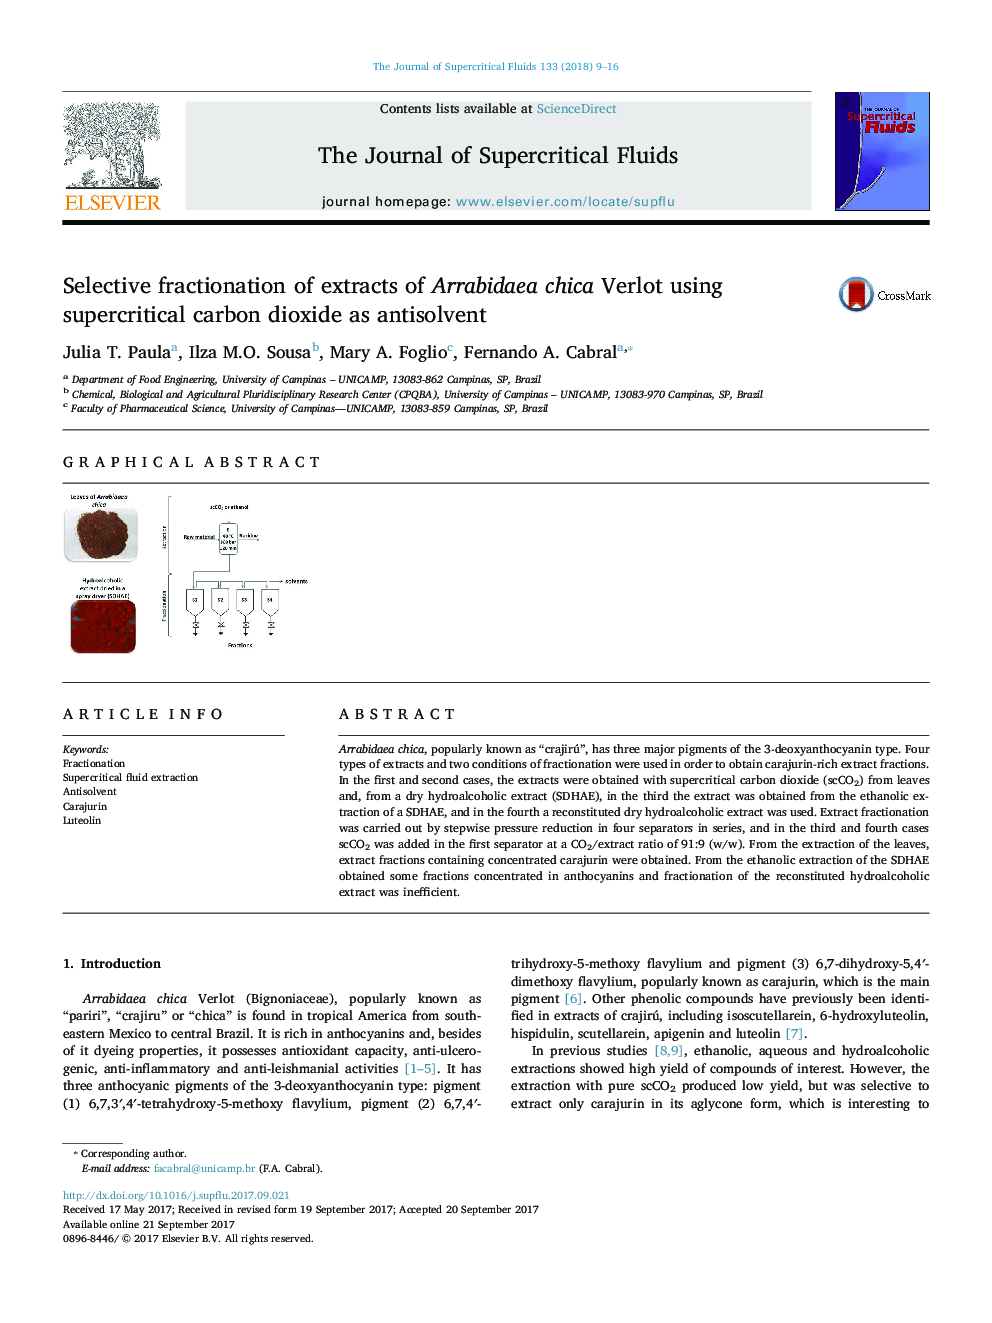 Selective fractionation of extracts of Arrabidaea chica Verlot using supercritical carbon dioxide as antisolvent